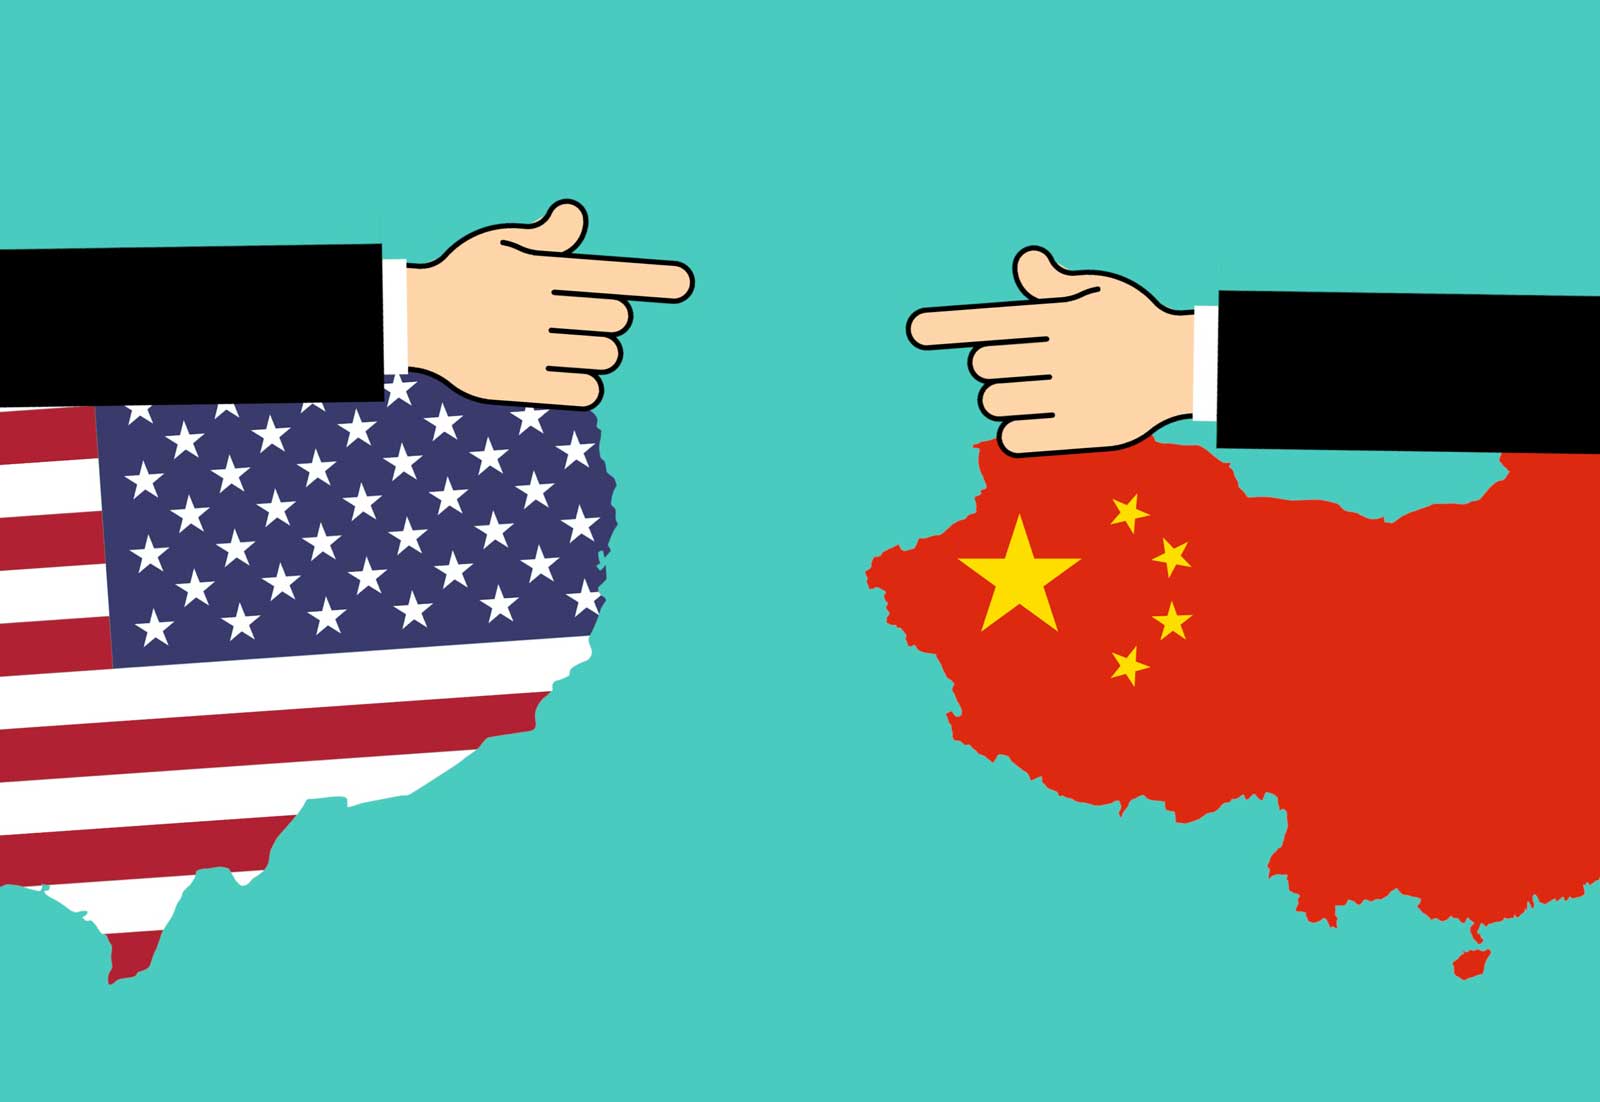 America and China represented as flags in the geographical shape of their countries, pointing at one another. 